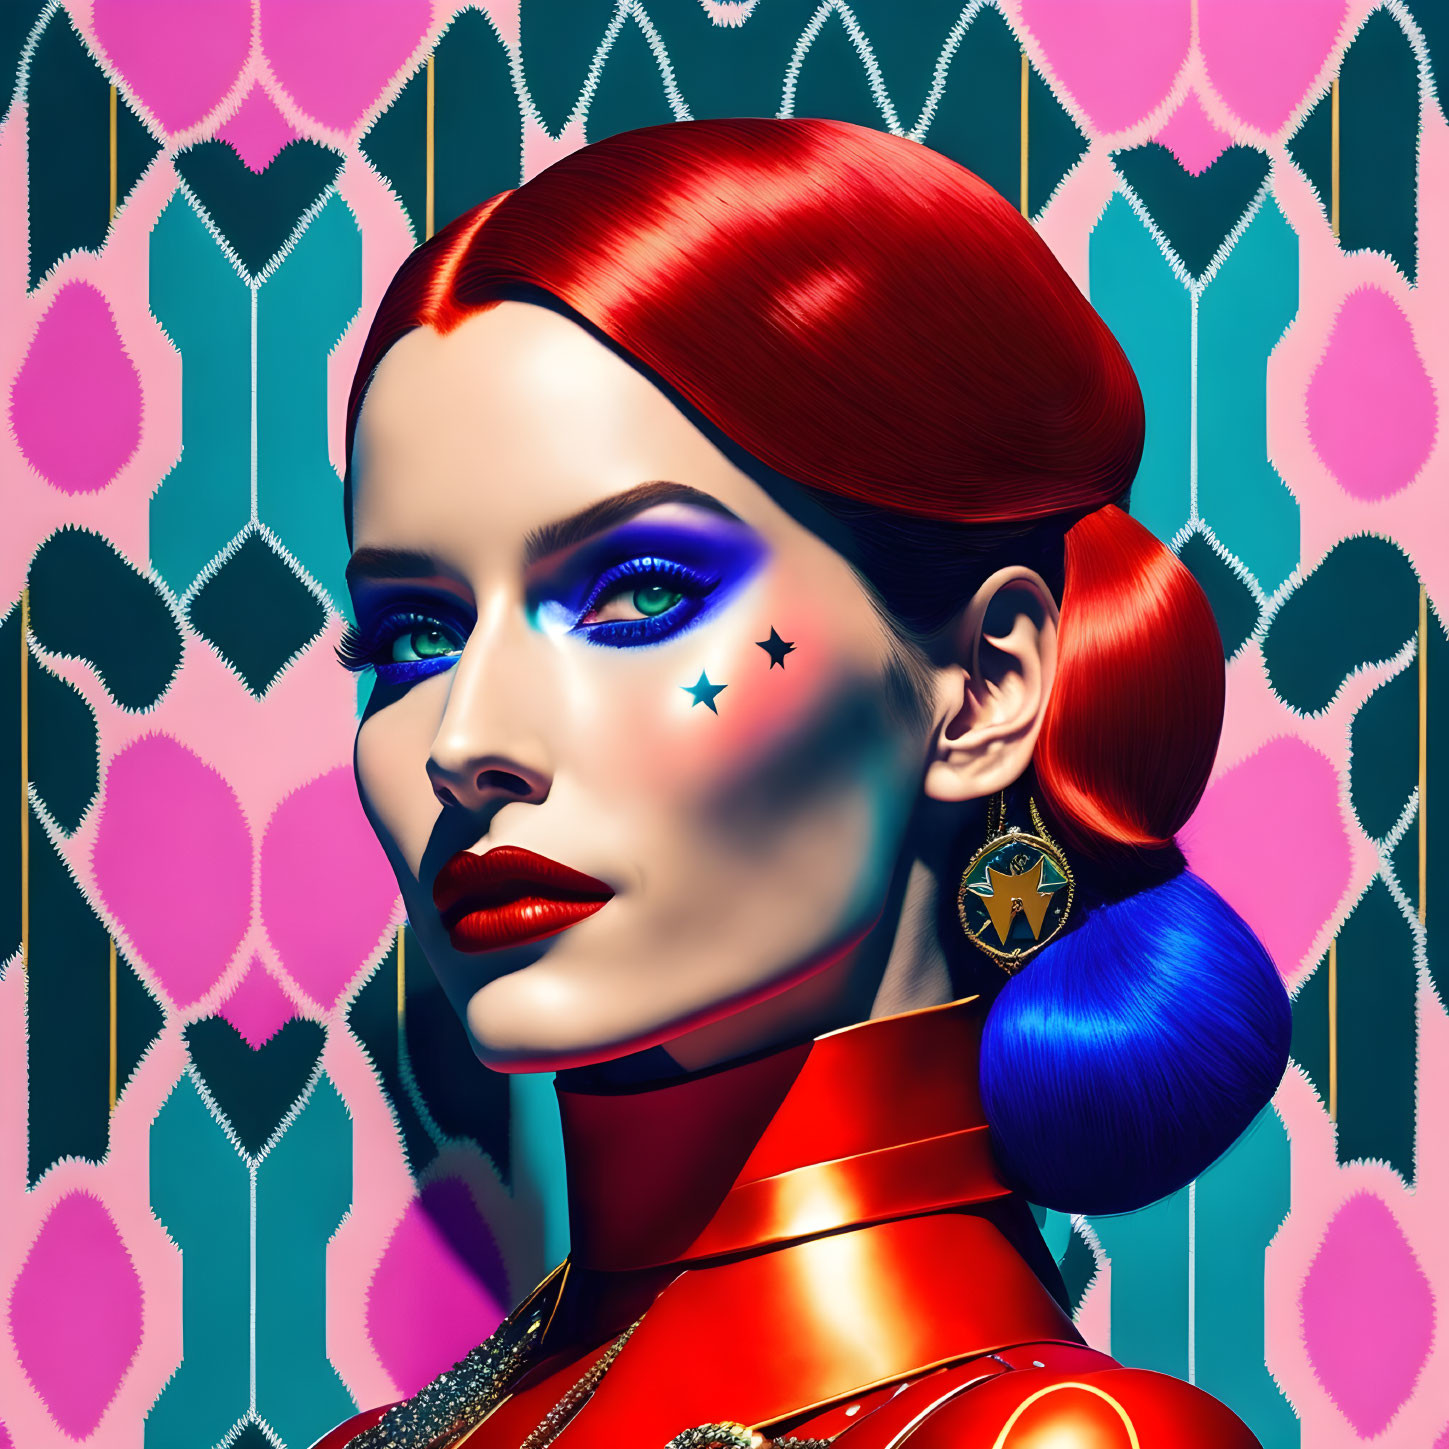 Colorful digital artwork of woman with red hair and stars on cheek